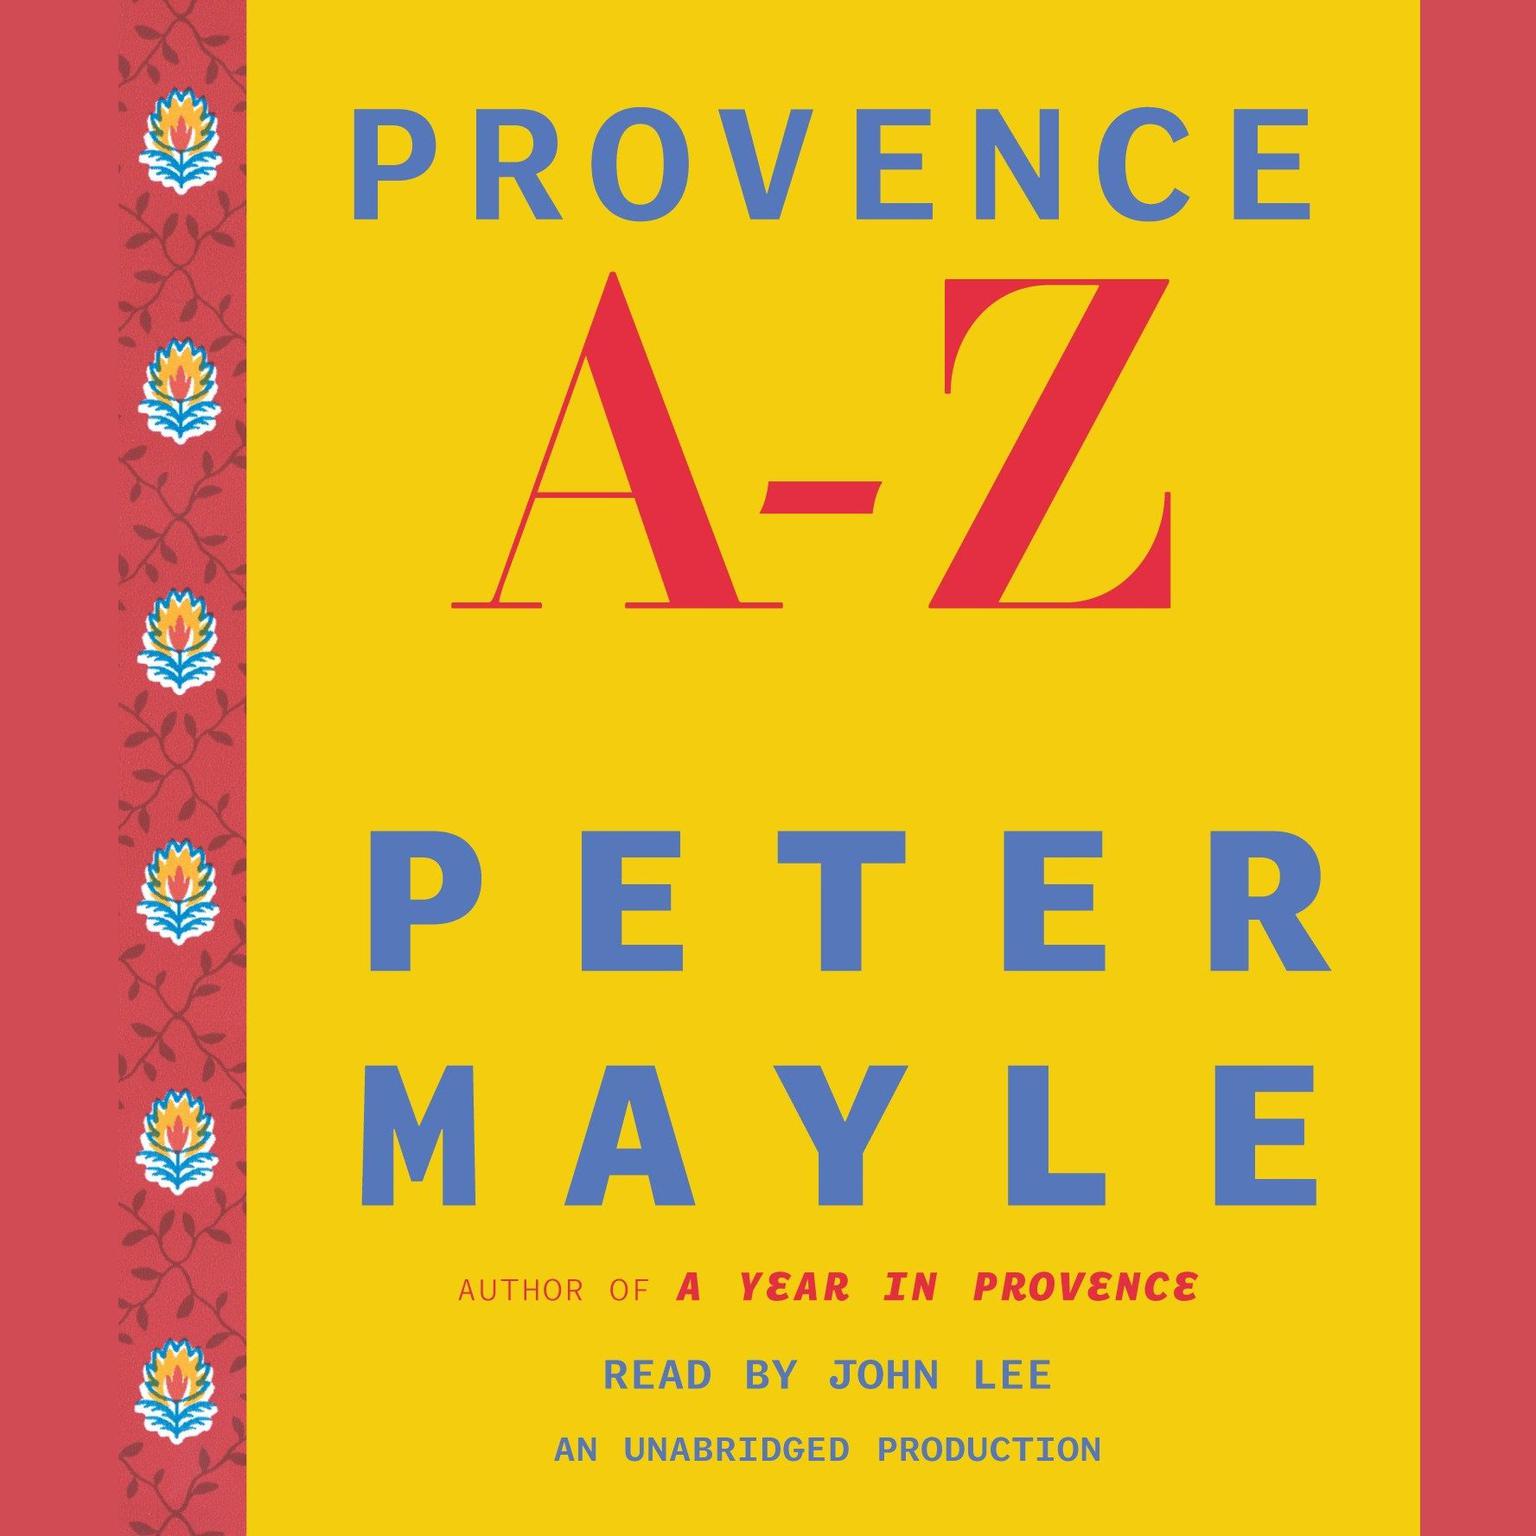 Provence A-Z: A Francophiles Essential Handbook Audiobook, by Peter Mayle